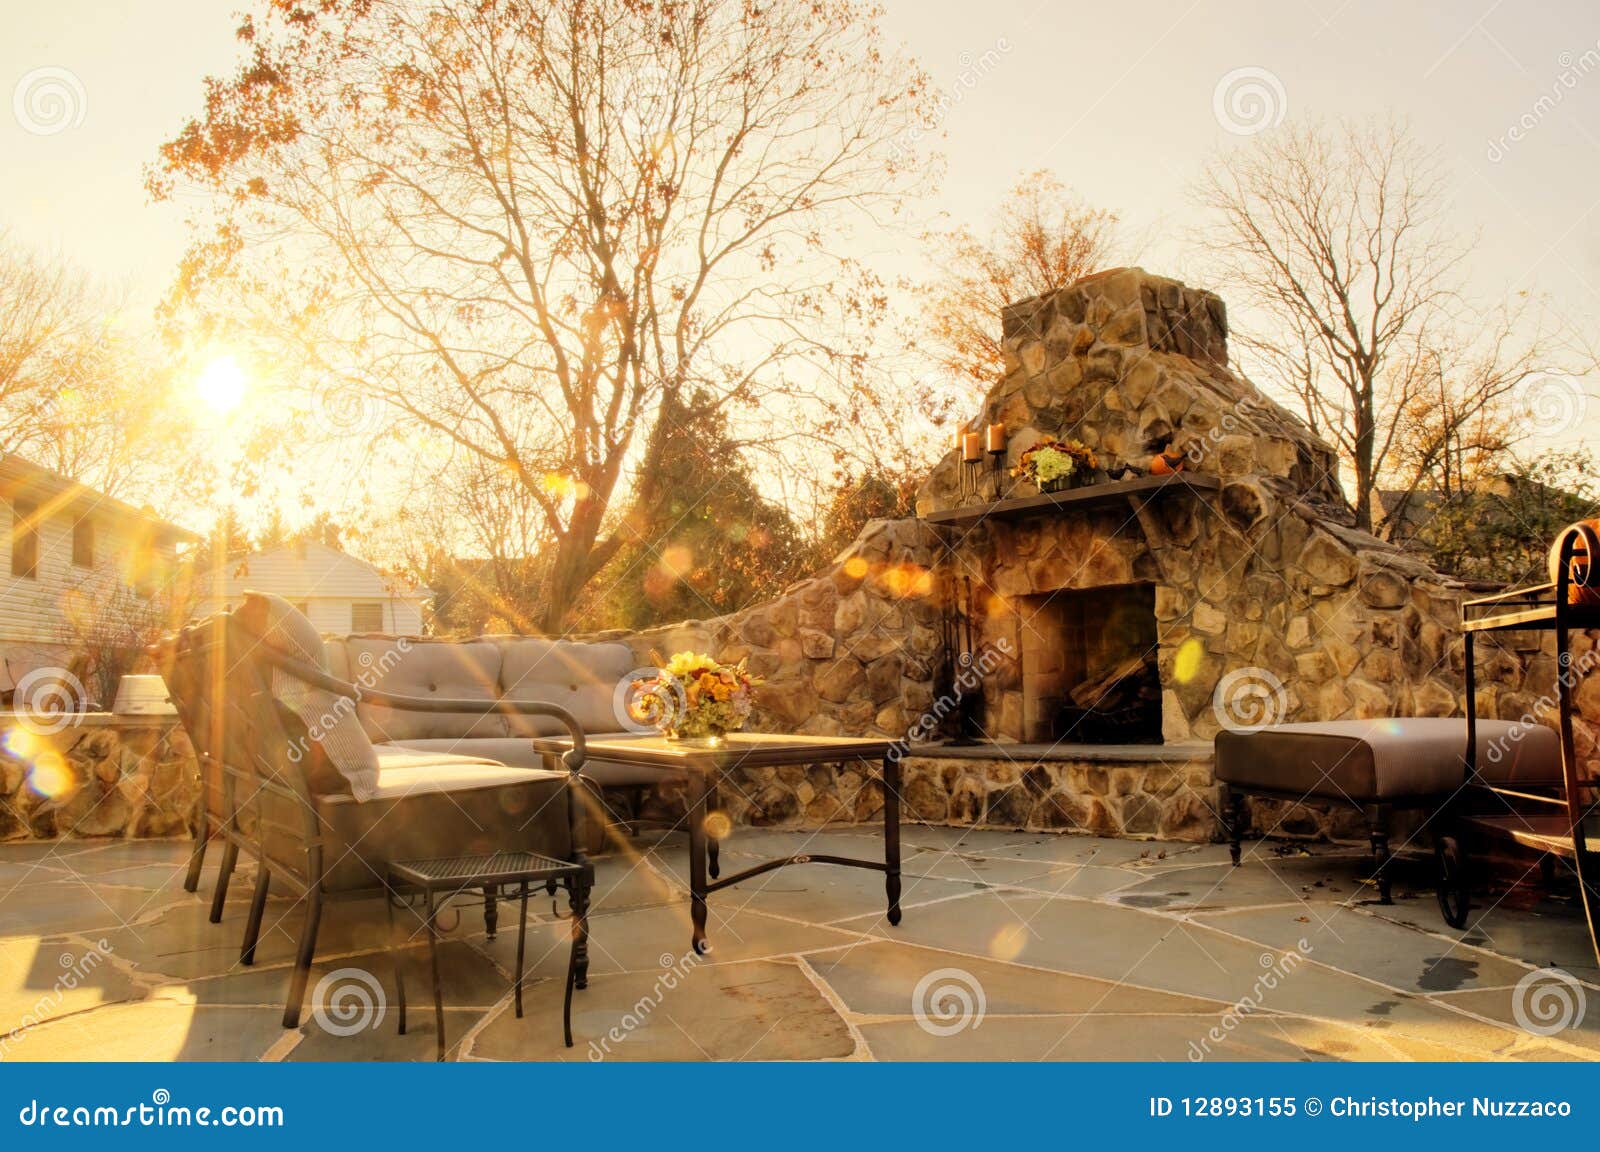 sunlit patio with stone fireplace